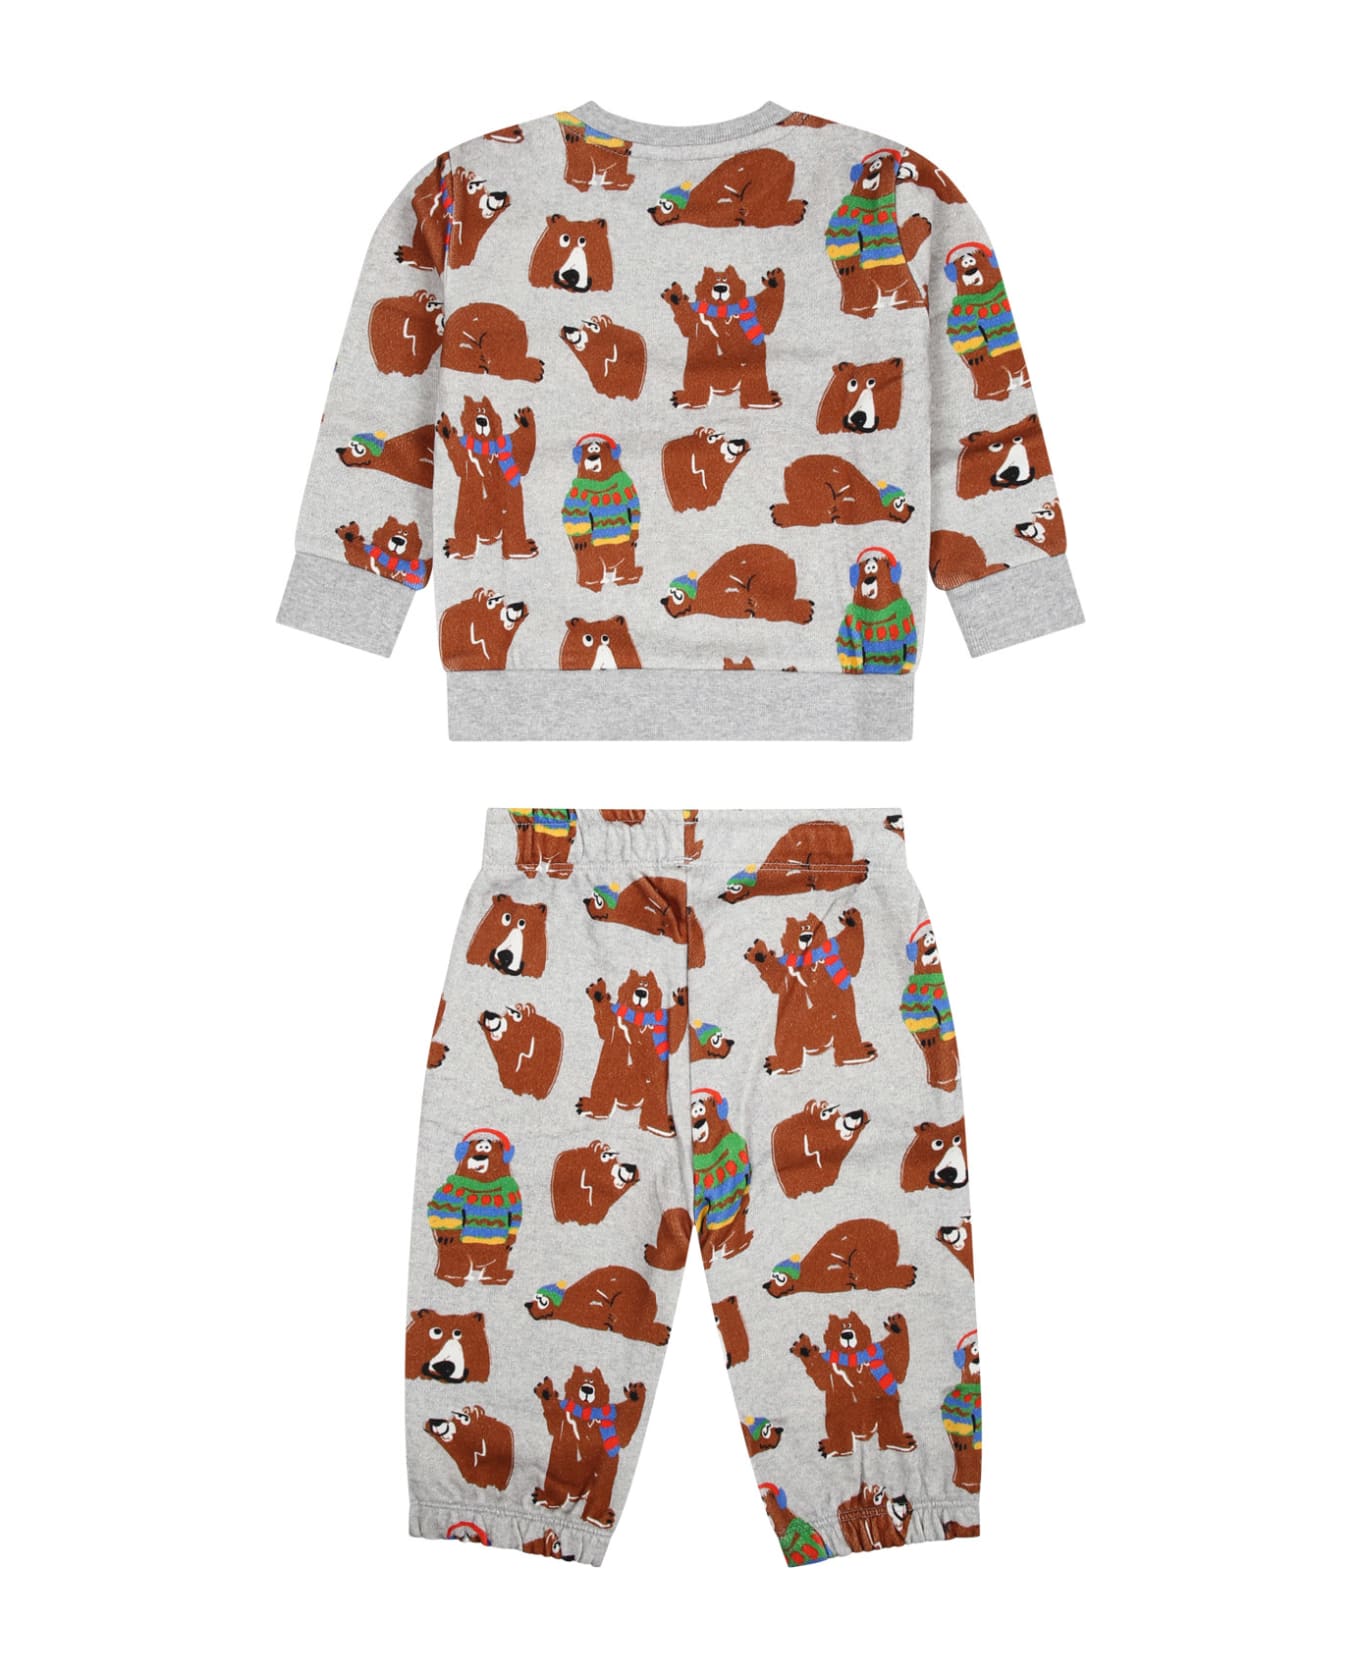 Stella McCartney Kids Gray Set For Baby Boy With All-over Bears - Grey